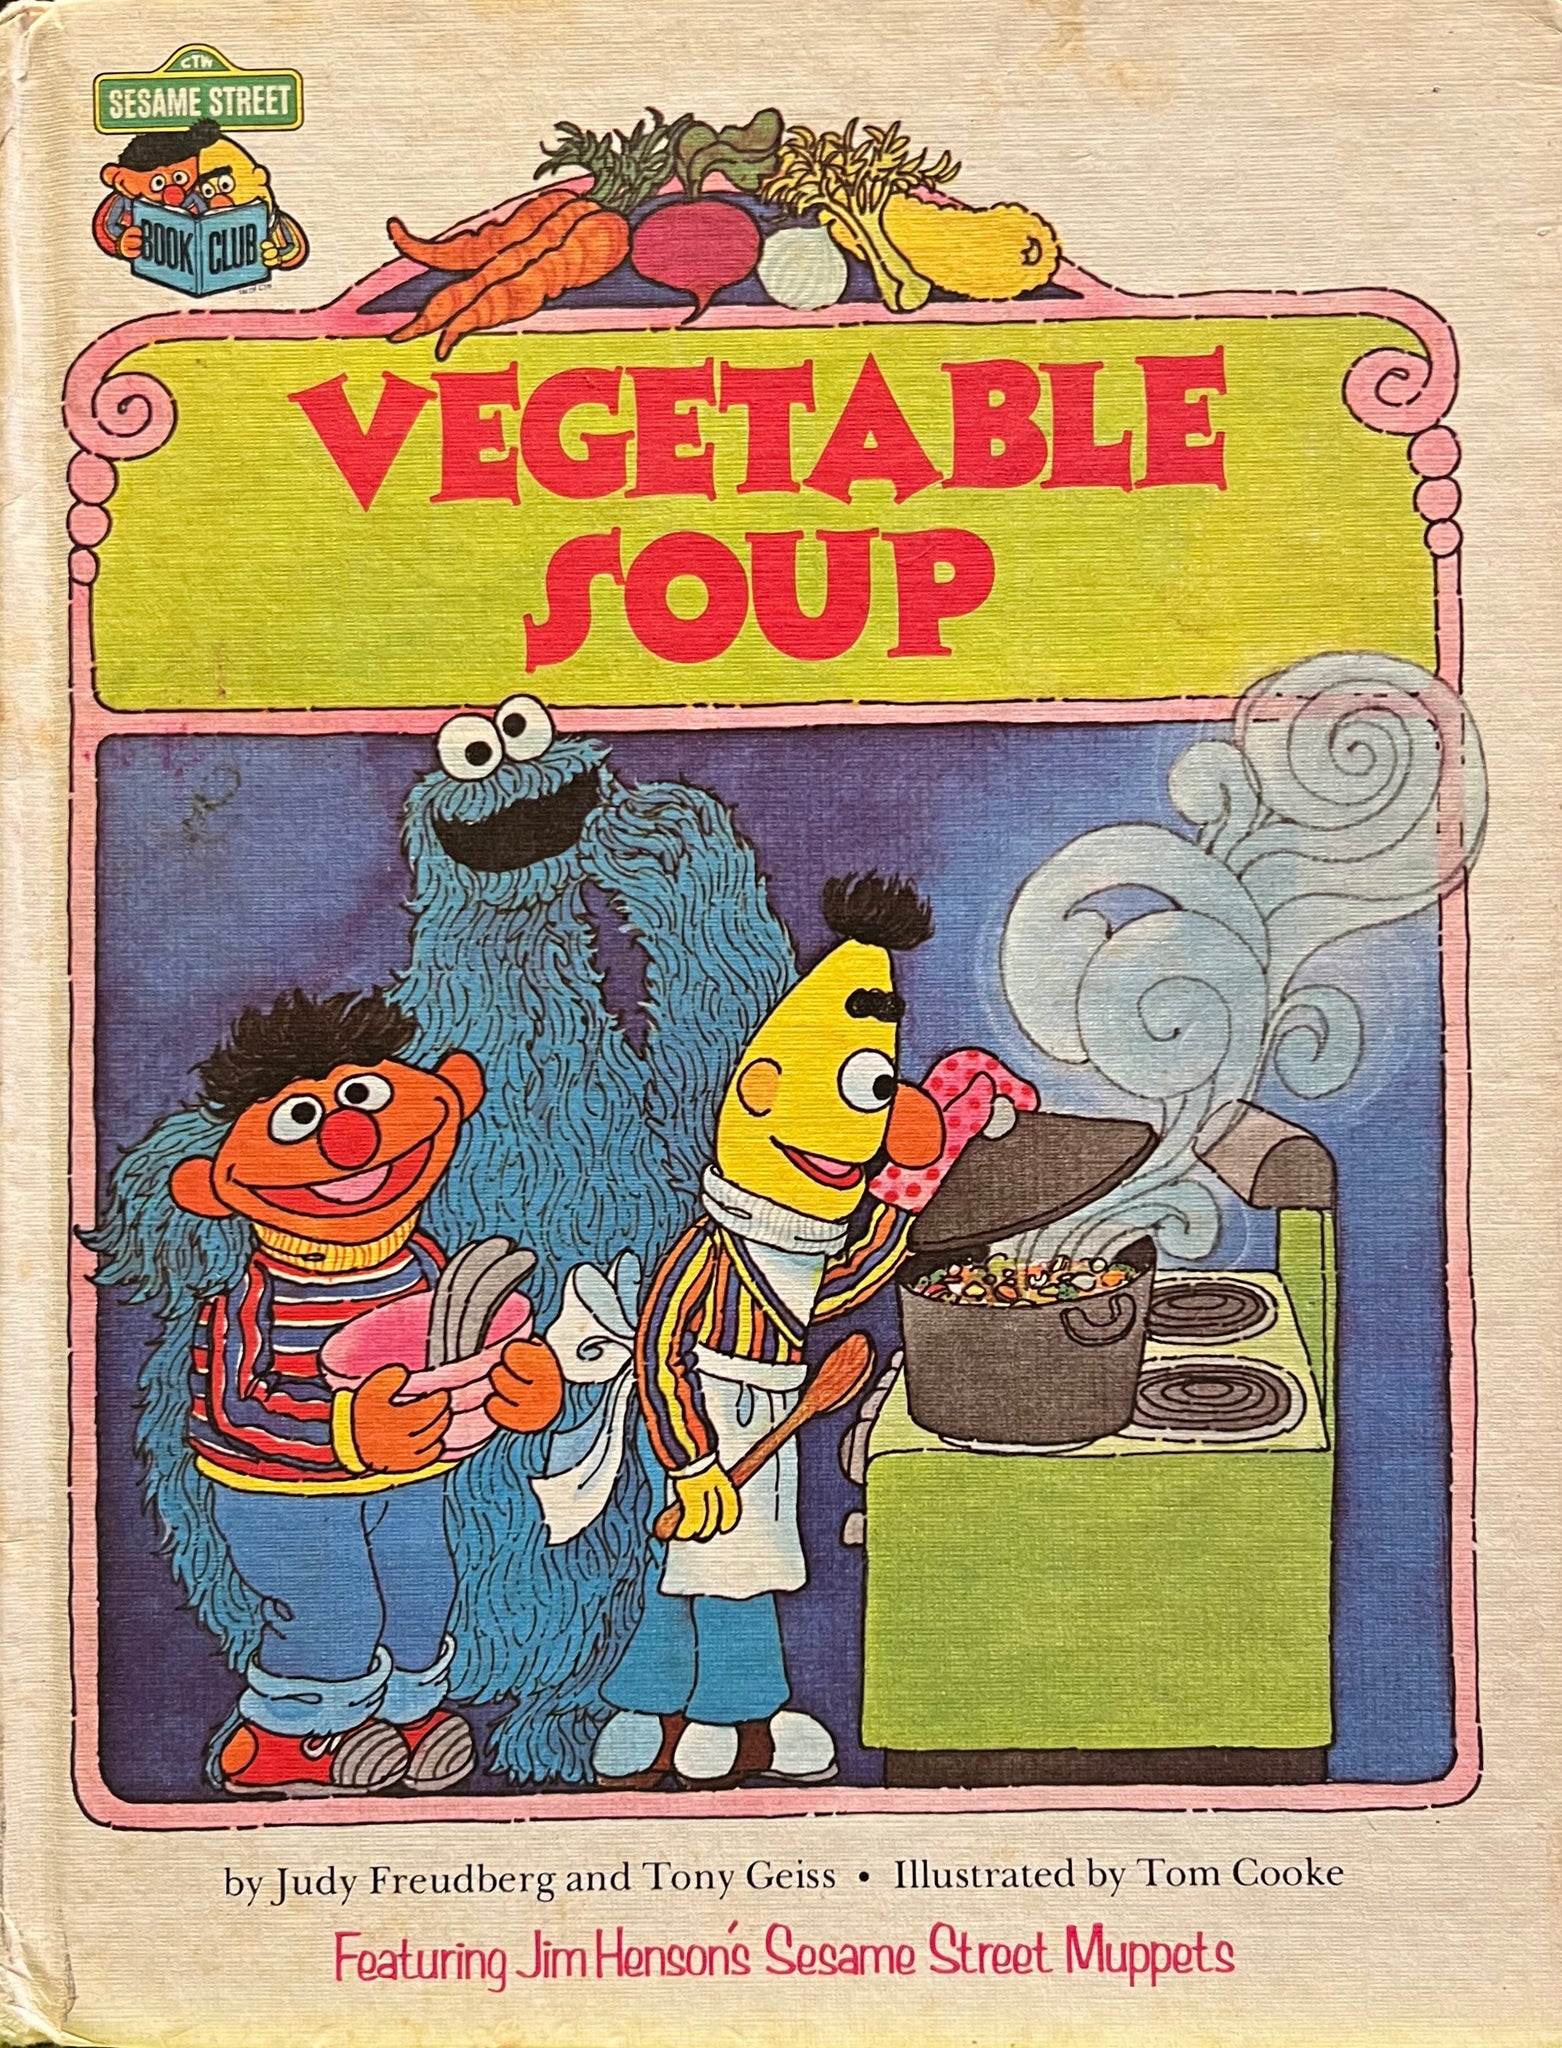 Vegetable Soup (Featuring Jim Henson’s Sesame Street Muppets), Judy Freudberg and Tony Geiss